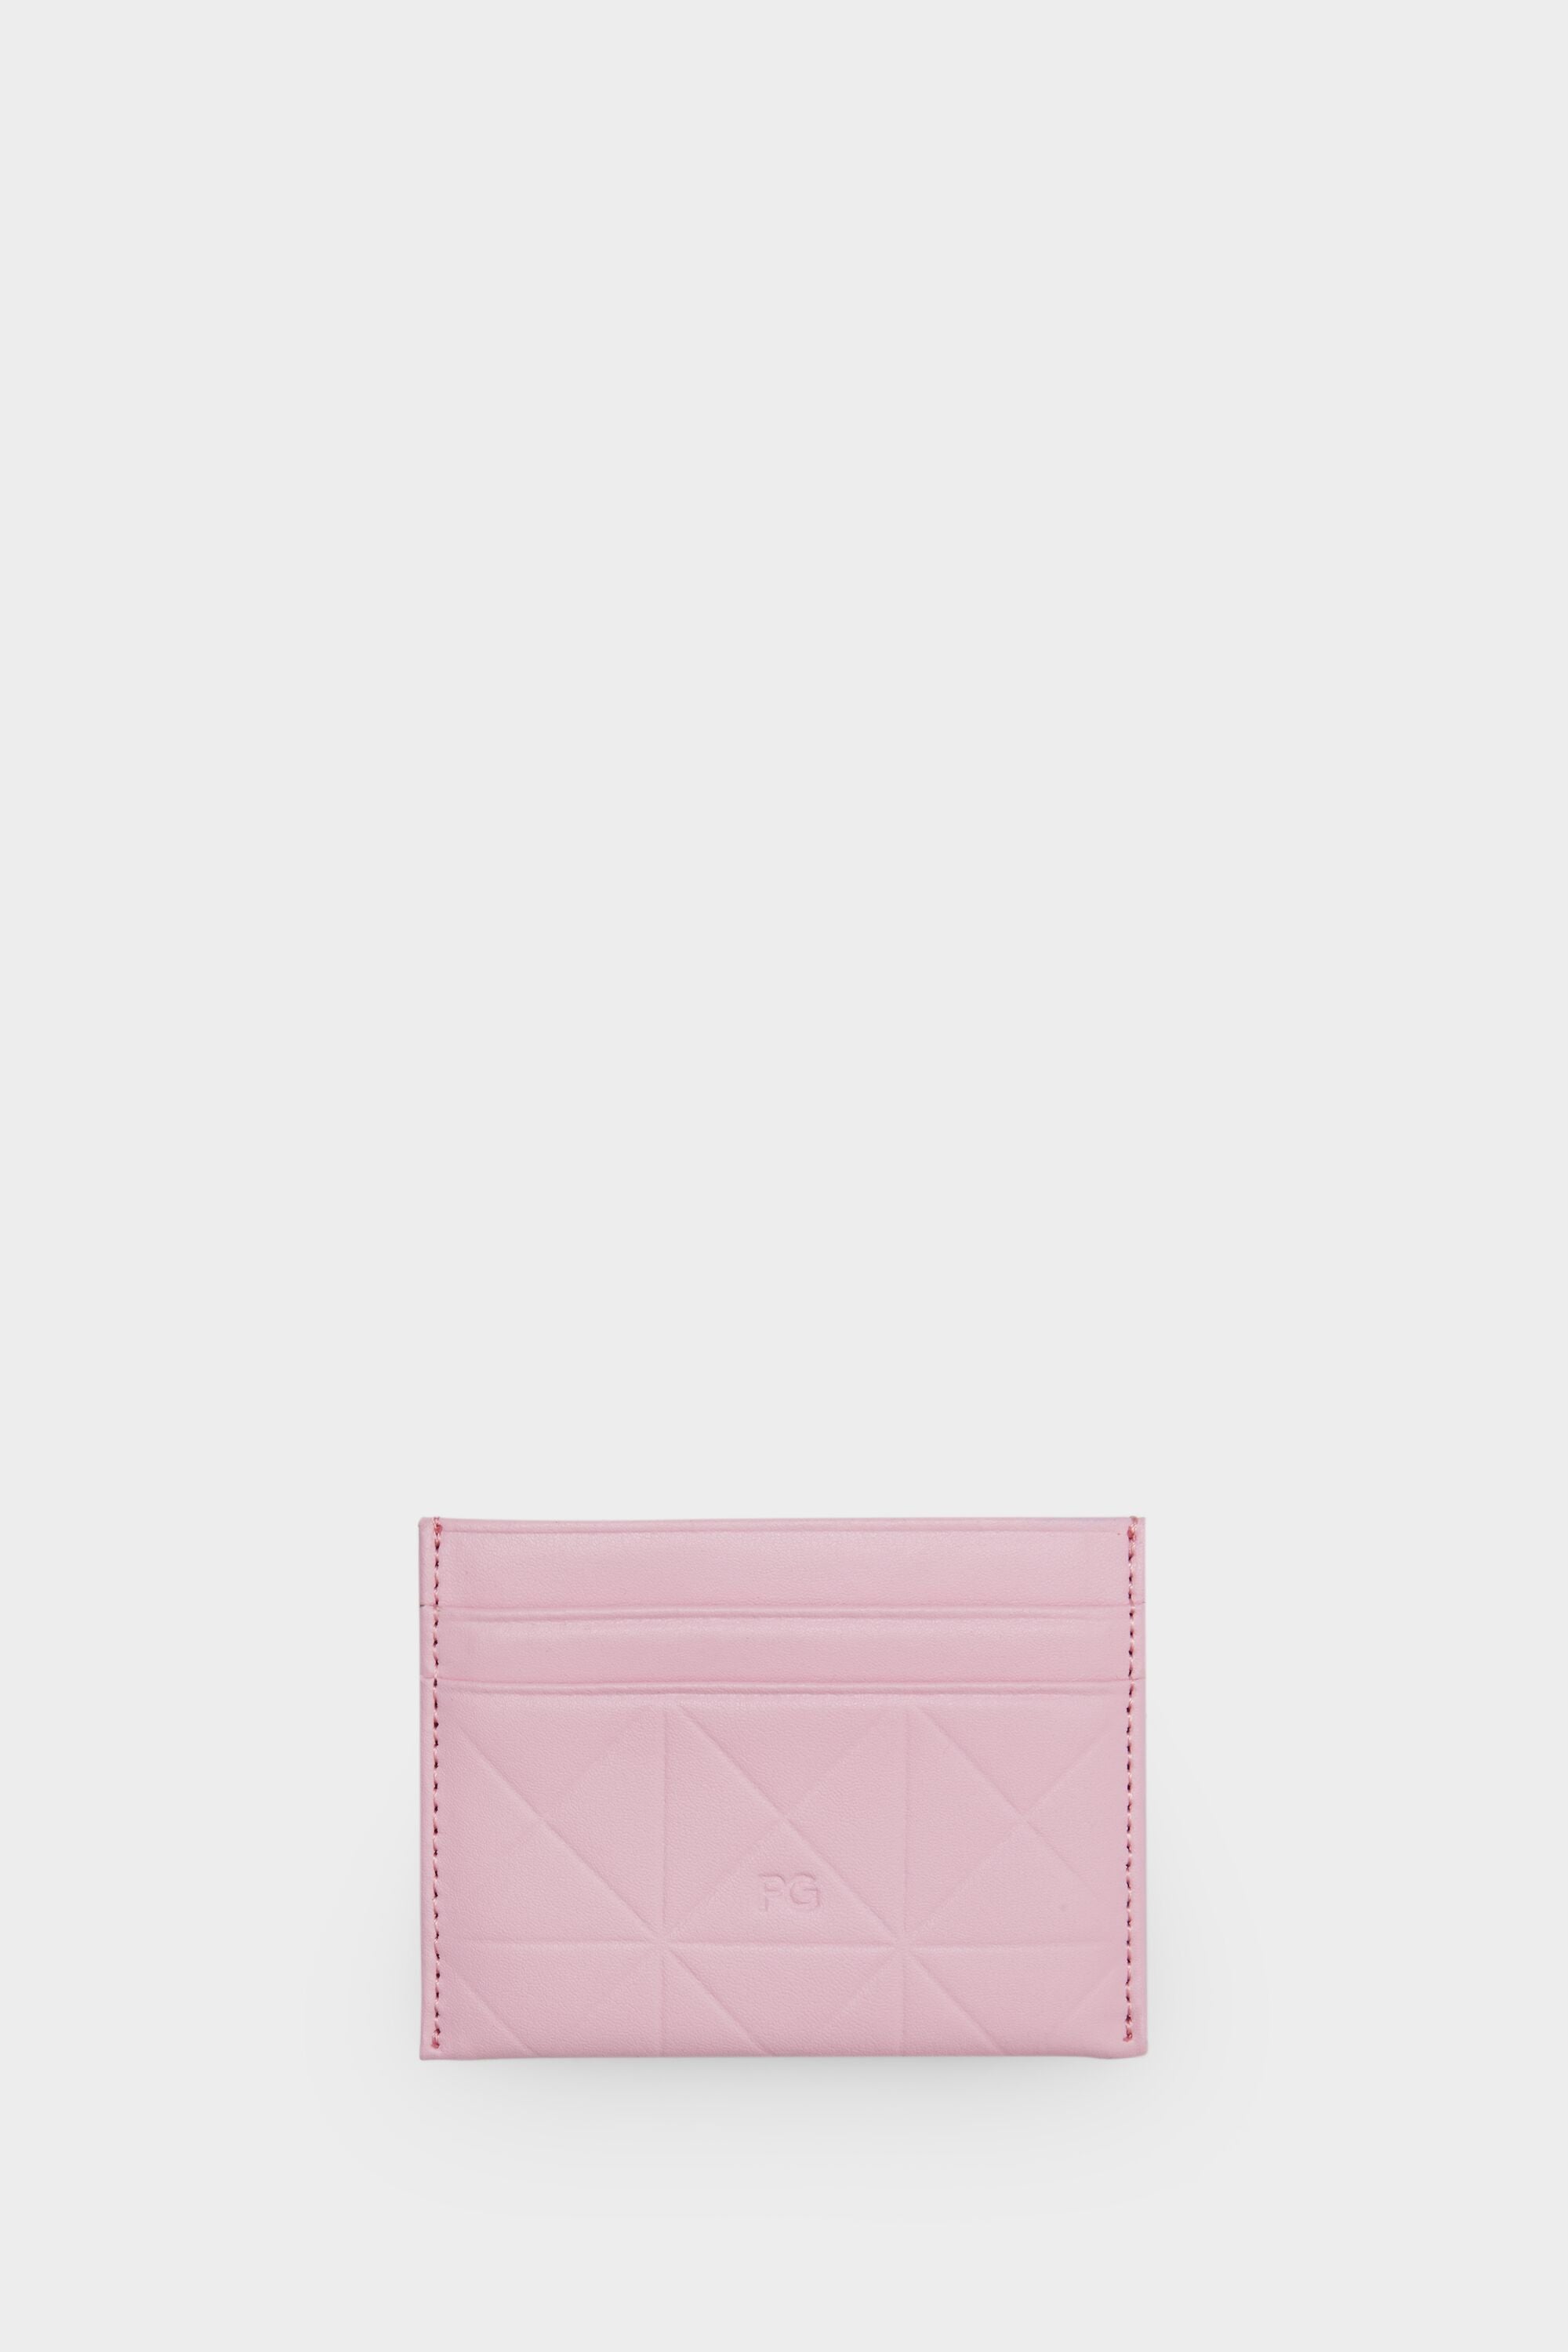 PG cube leather card holder pink - Purificacion Garcia Italy